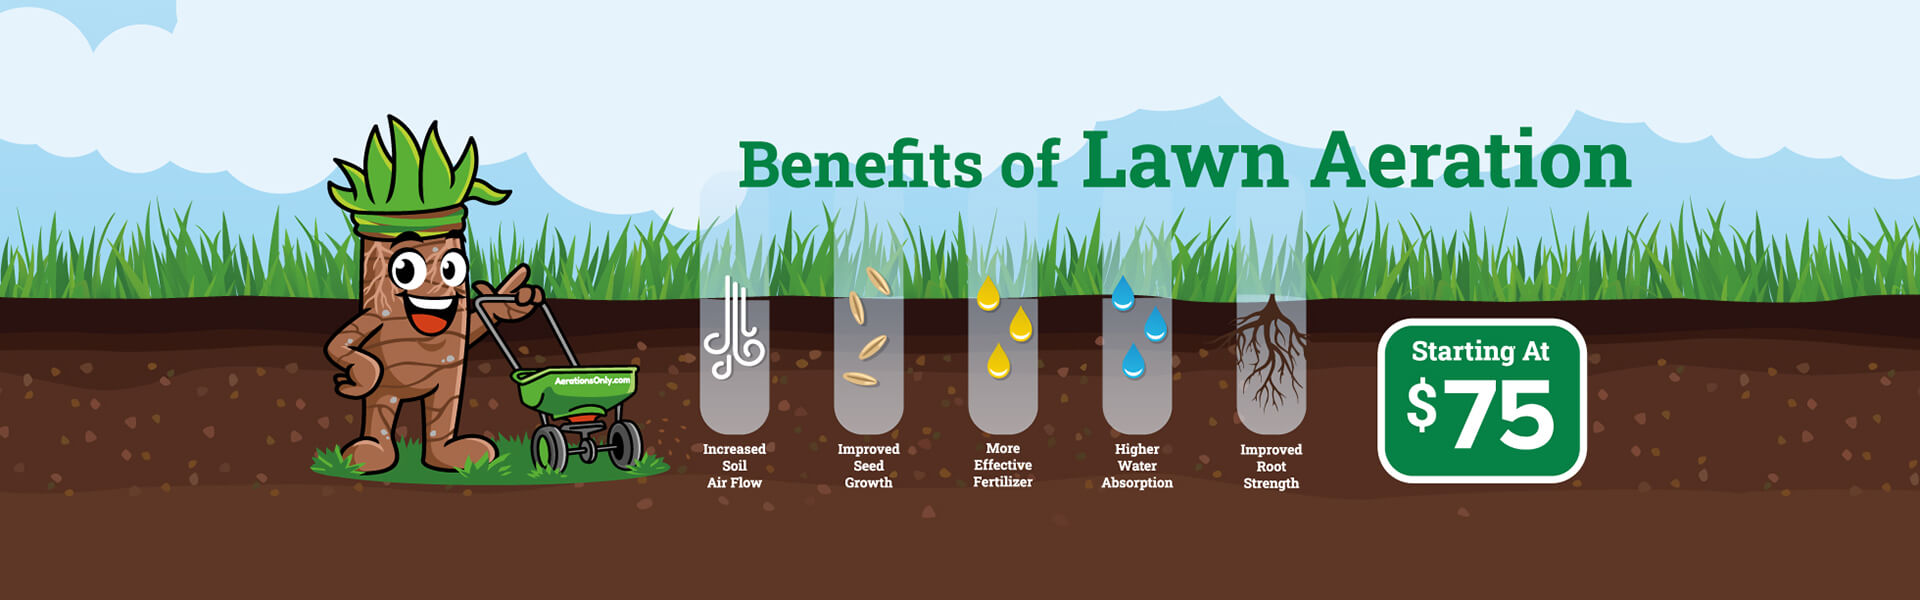 Lawn Aeration in St. Louis